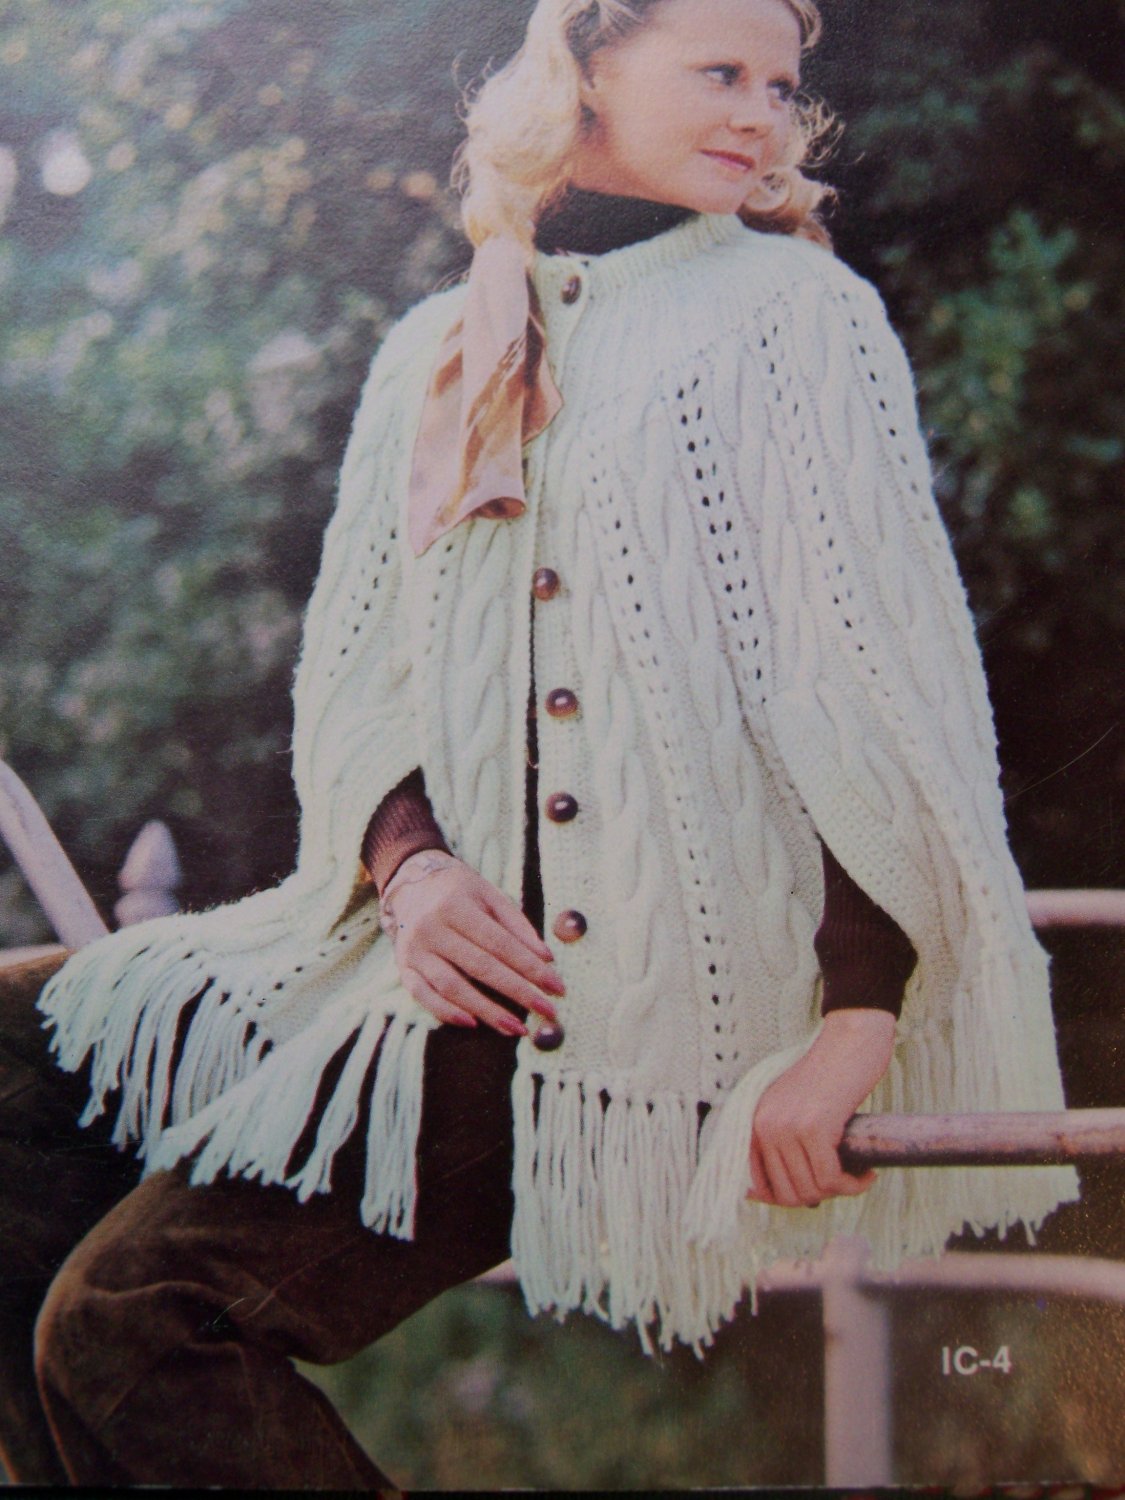 1970 S Vintage Capes For Women Knitting And Crochet Patterns 2560